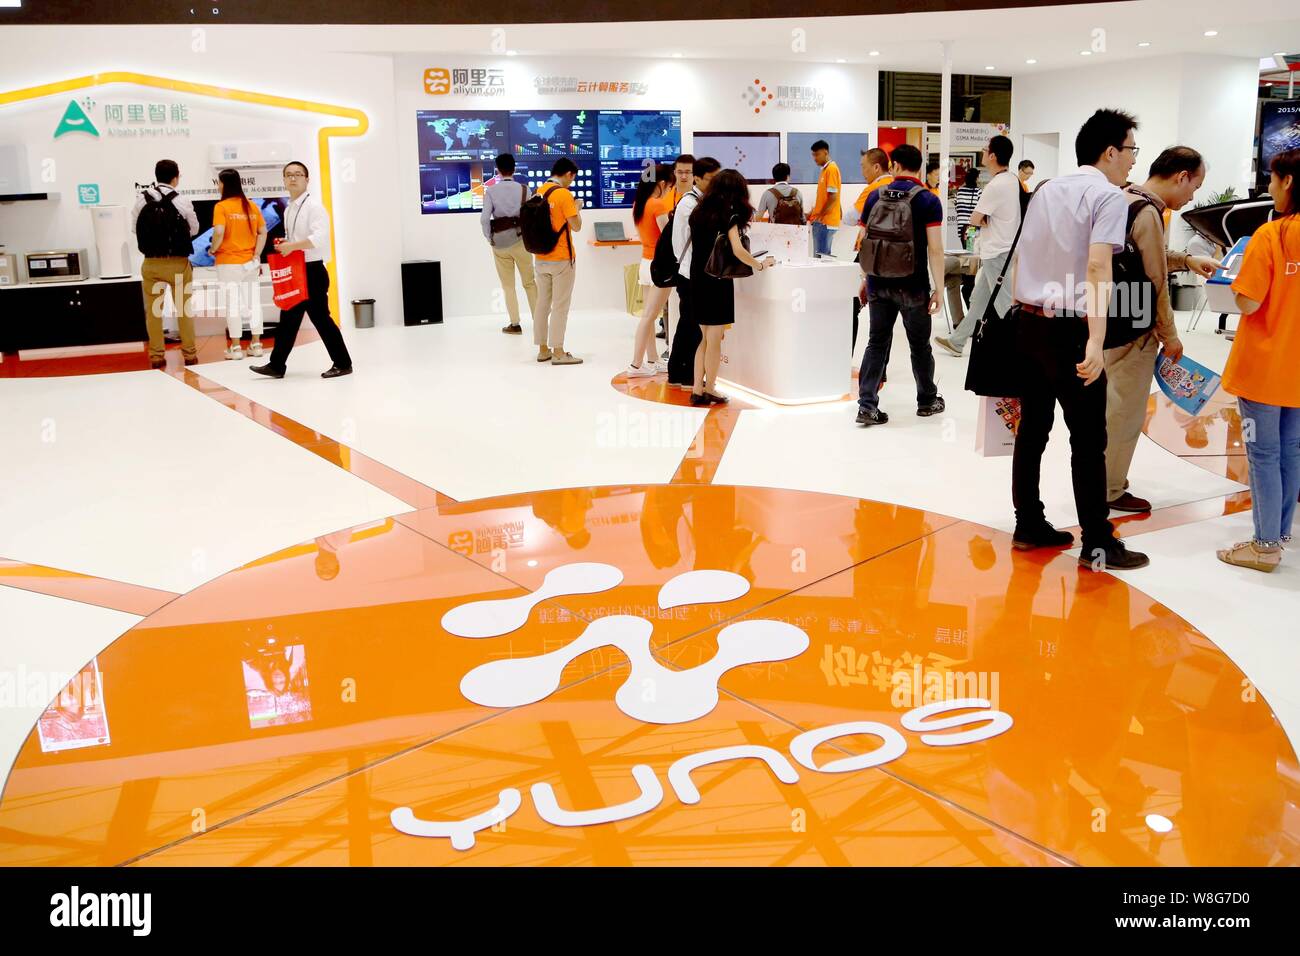 Visitors try out or inquire about YunOS, Aliyun, smart living and other services offered by Alibaba during the GSMA Mobile World Congress 2015 in Shan Stock Photo